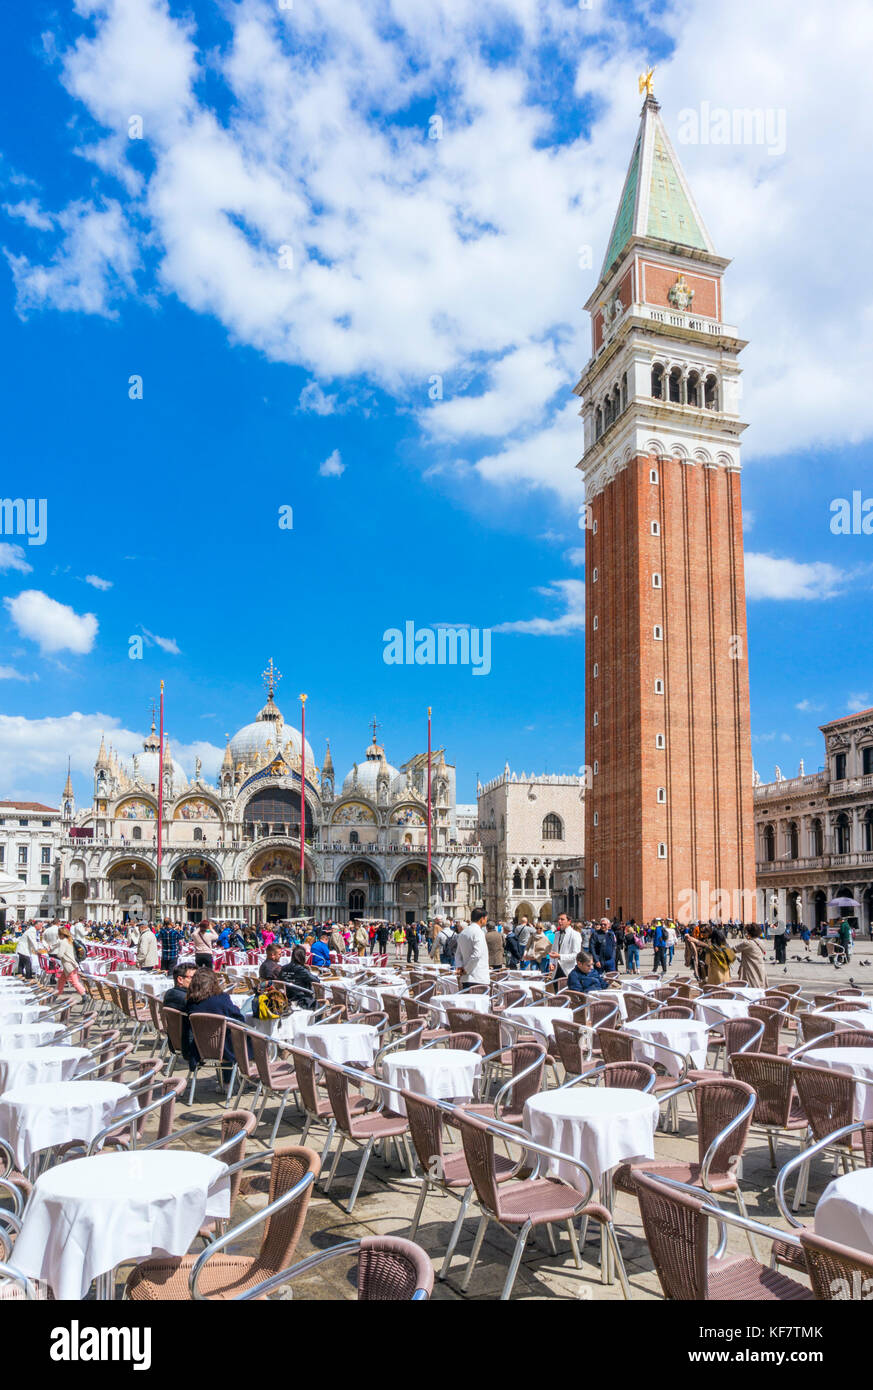 VENICE ITALY VENICE Cafes in St marks Square Piazza san marco in front of the Campanile and basilica di san marco  St. Mark’s Basilica Venice italy Stock Photo